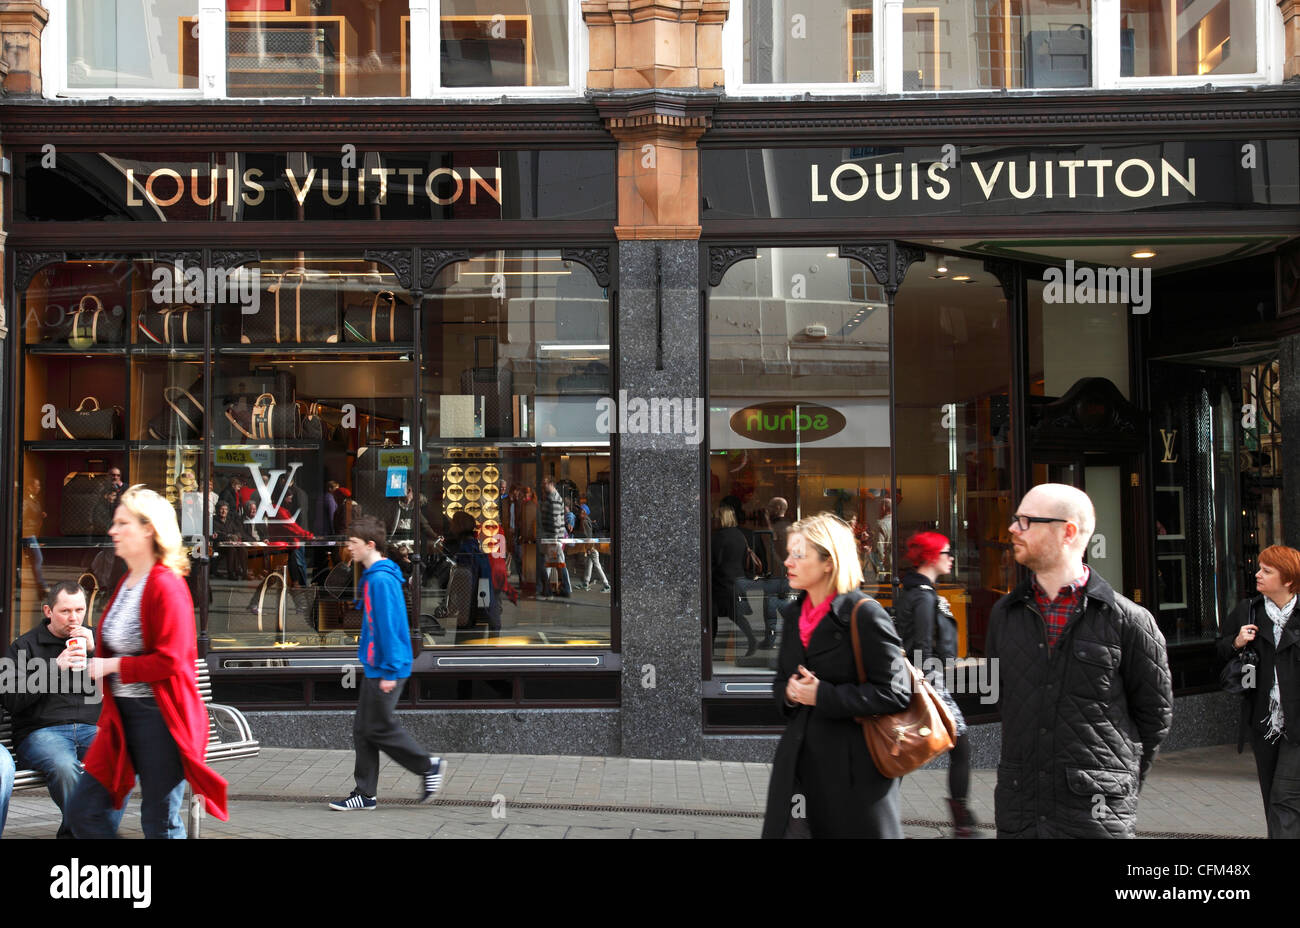 Louis Vuitton Outlet Online Store Uk | Confederated Tribes of the Umatilla Indian Reservation